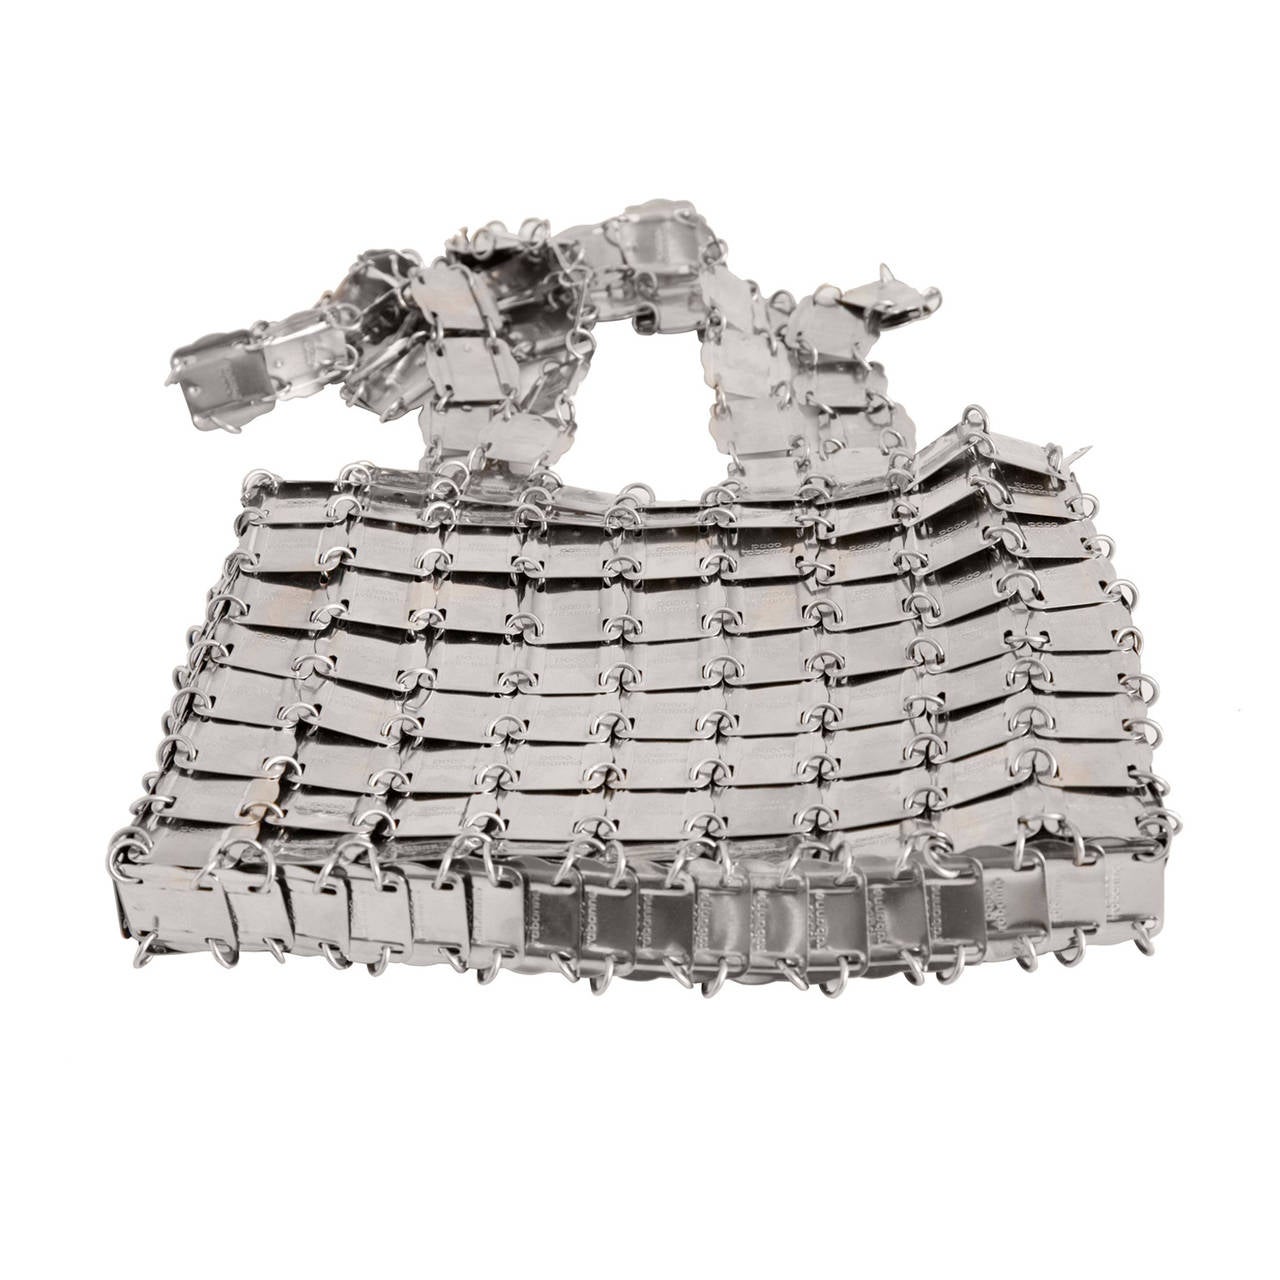 Paco Rabanne silver tone metal purse with zip purse attached inside. 
Each metal pieces are embossed and linked together.
Purse handle length : 68cm